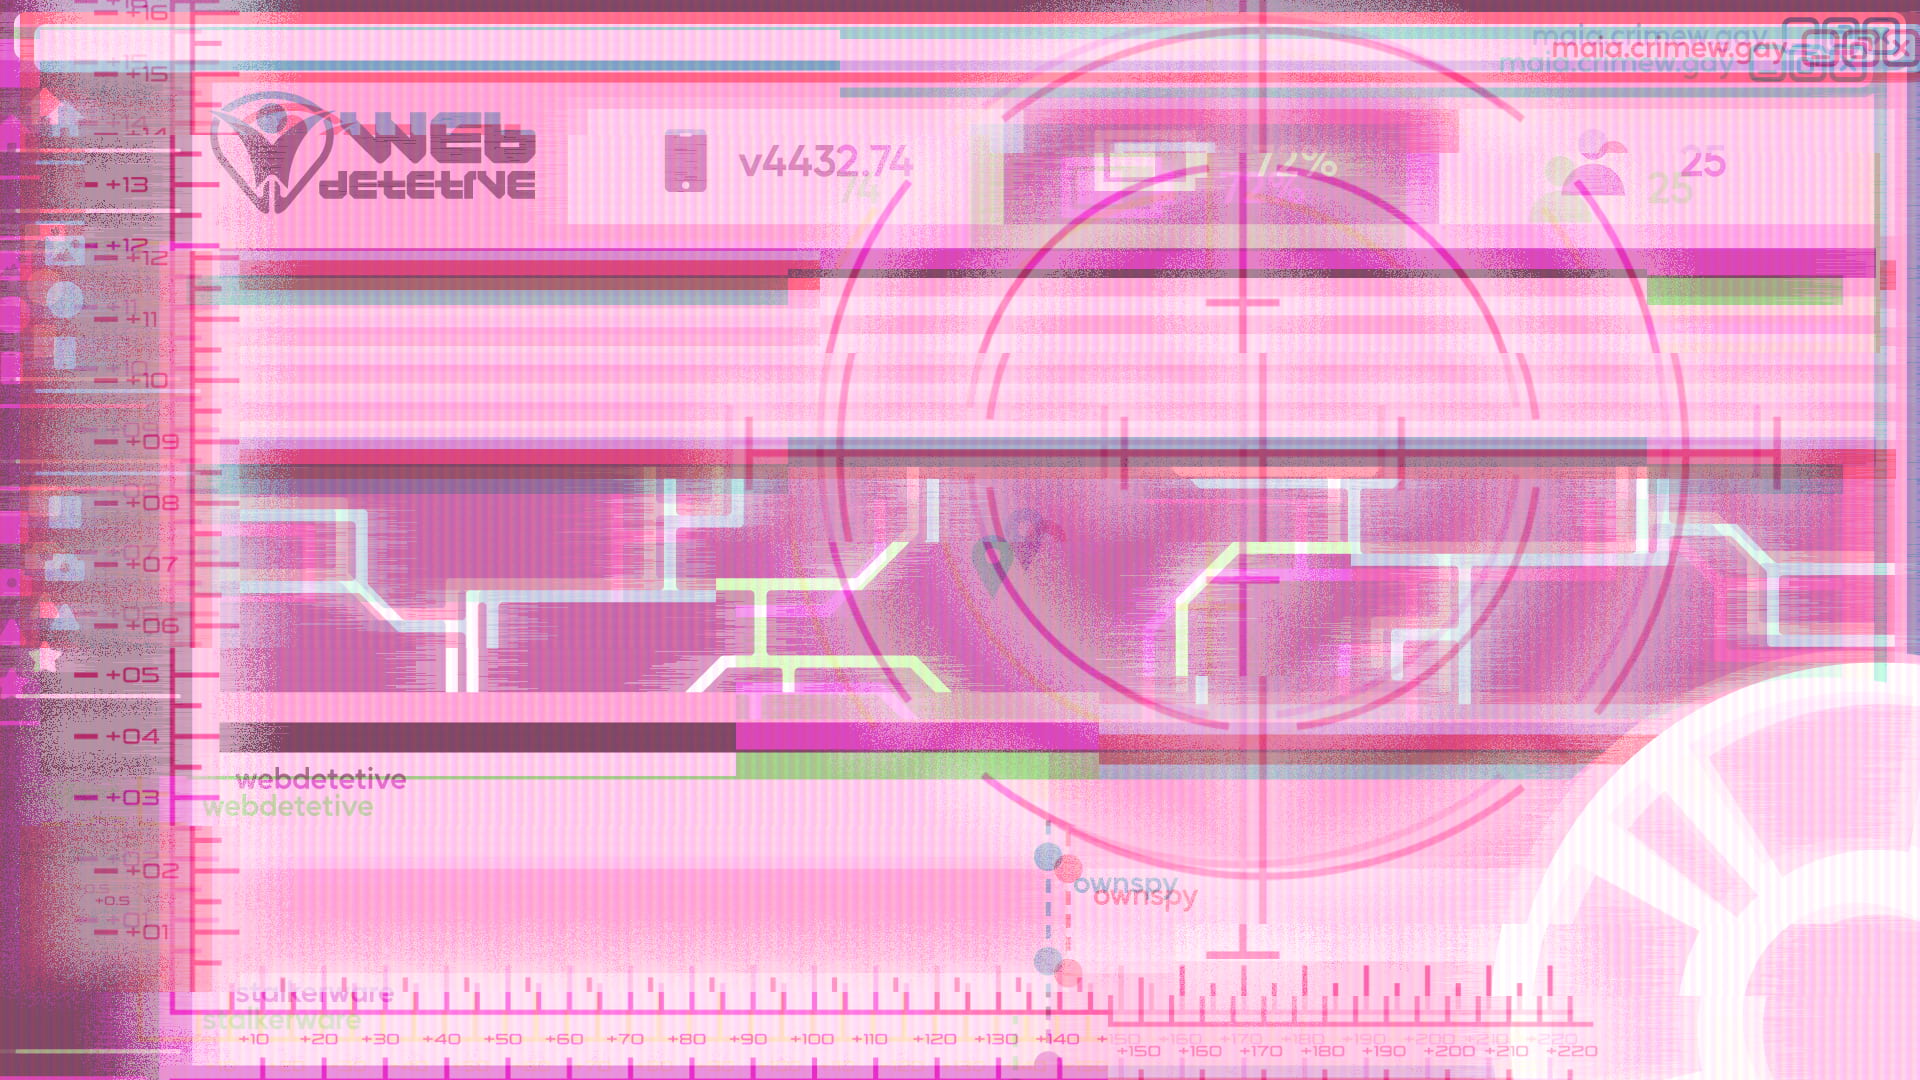 a glitchy pink illustration of a y2k-/cyberpunk-style stalkerware dashboard with a y2k-style WebDetetive logo in the top left and crosshairs drawn over the whole image